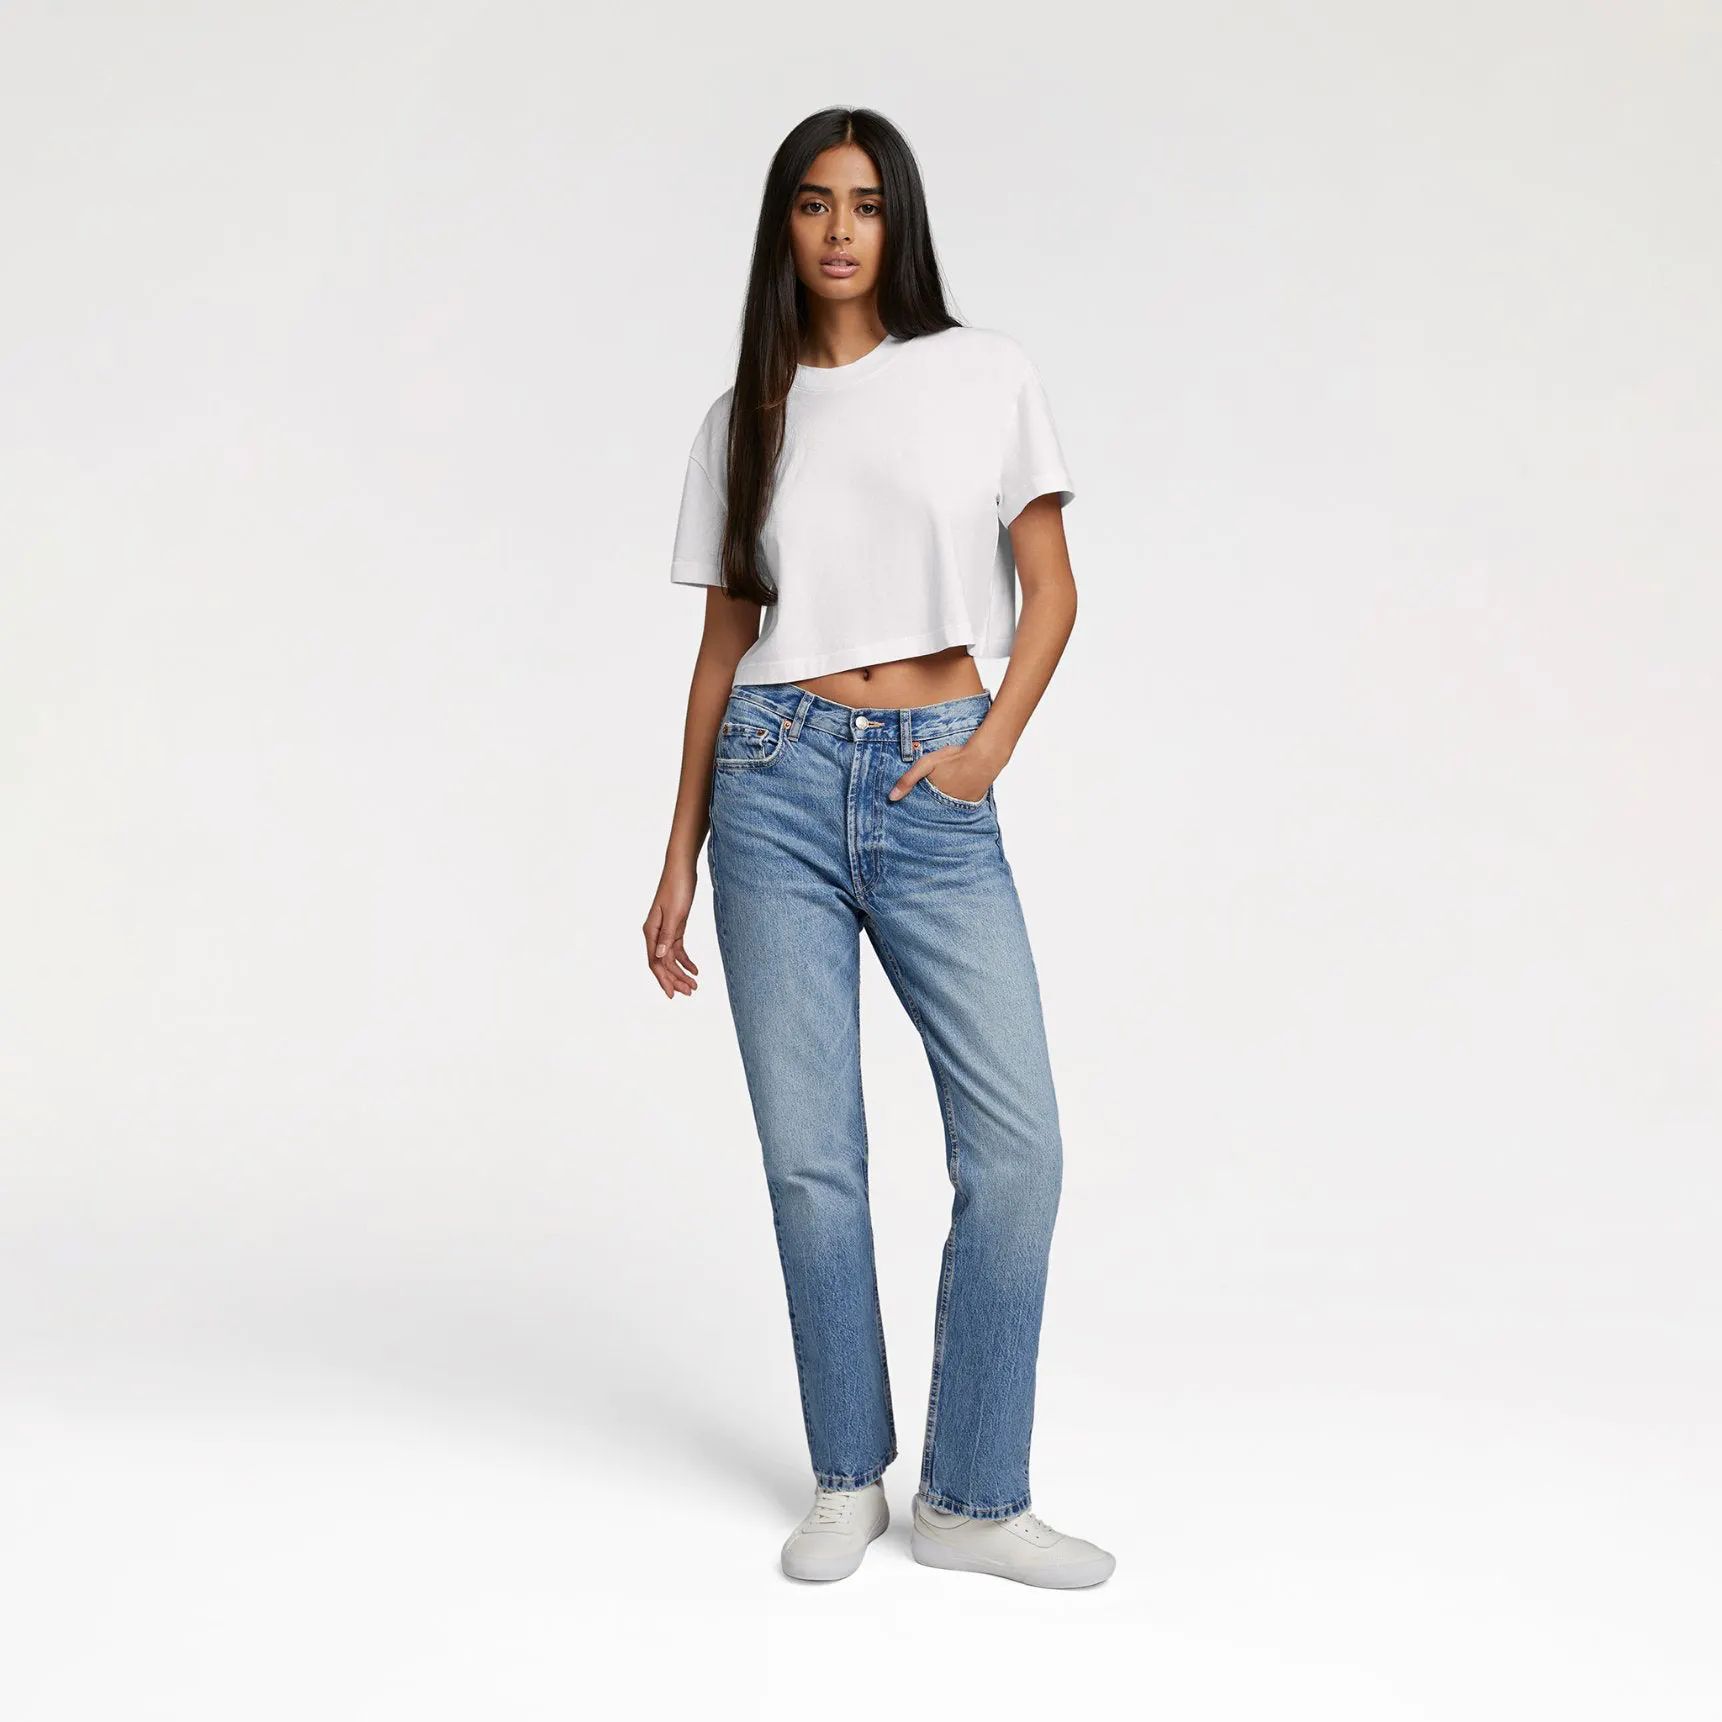 Women's Cropped Tee - White - nuuds | nuuds